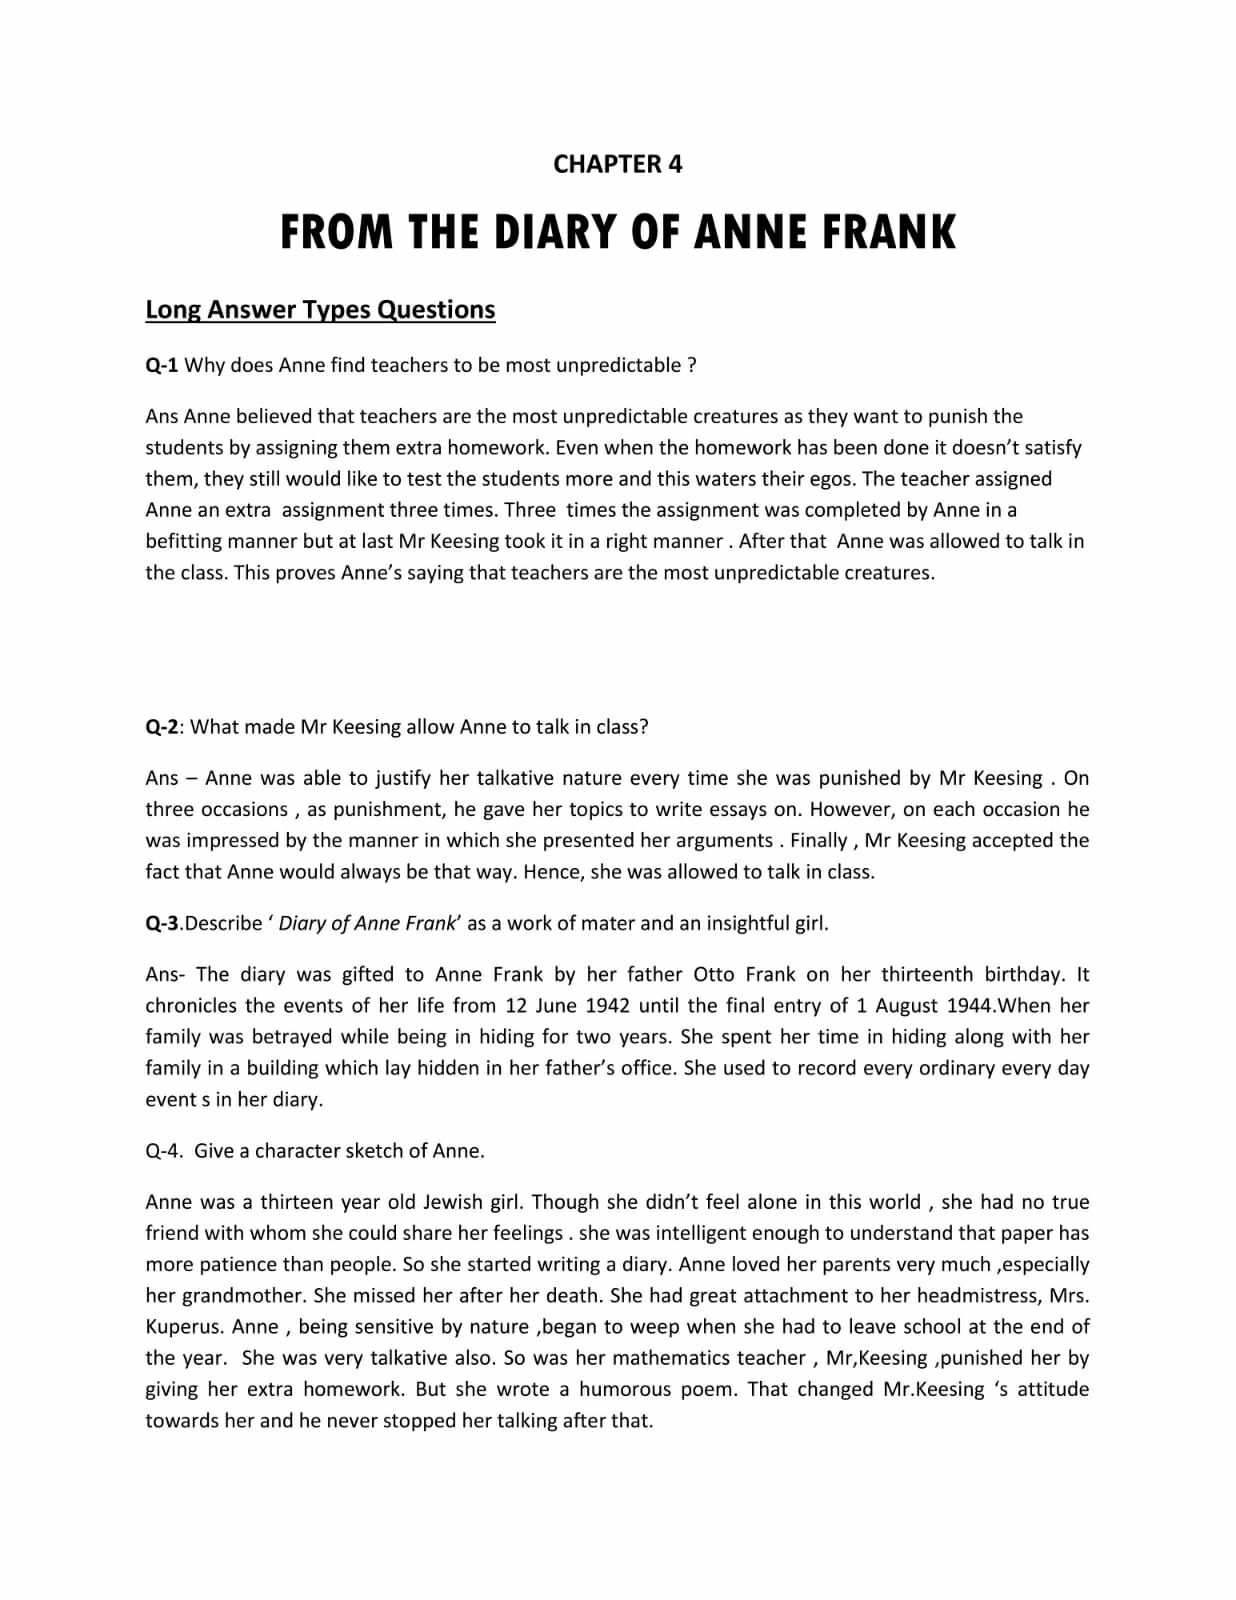 The diary of a young girlAnne frank